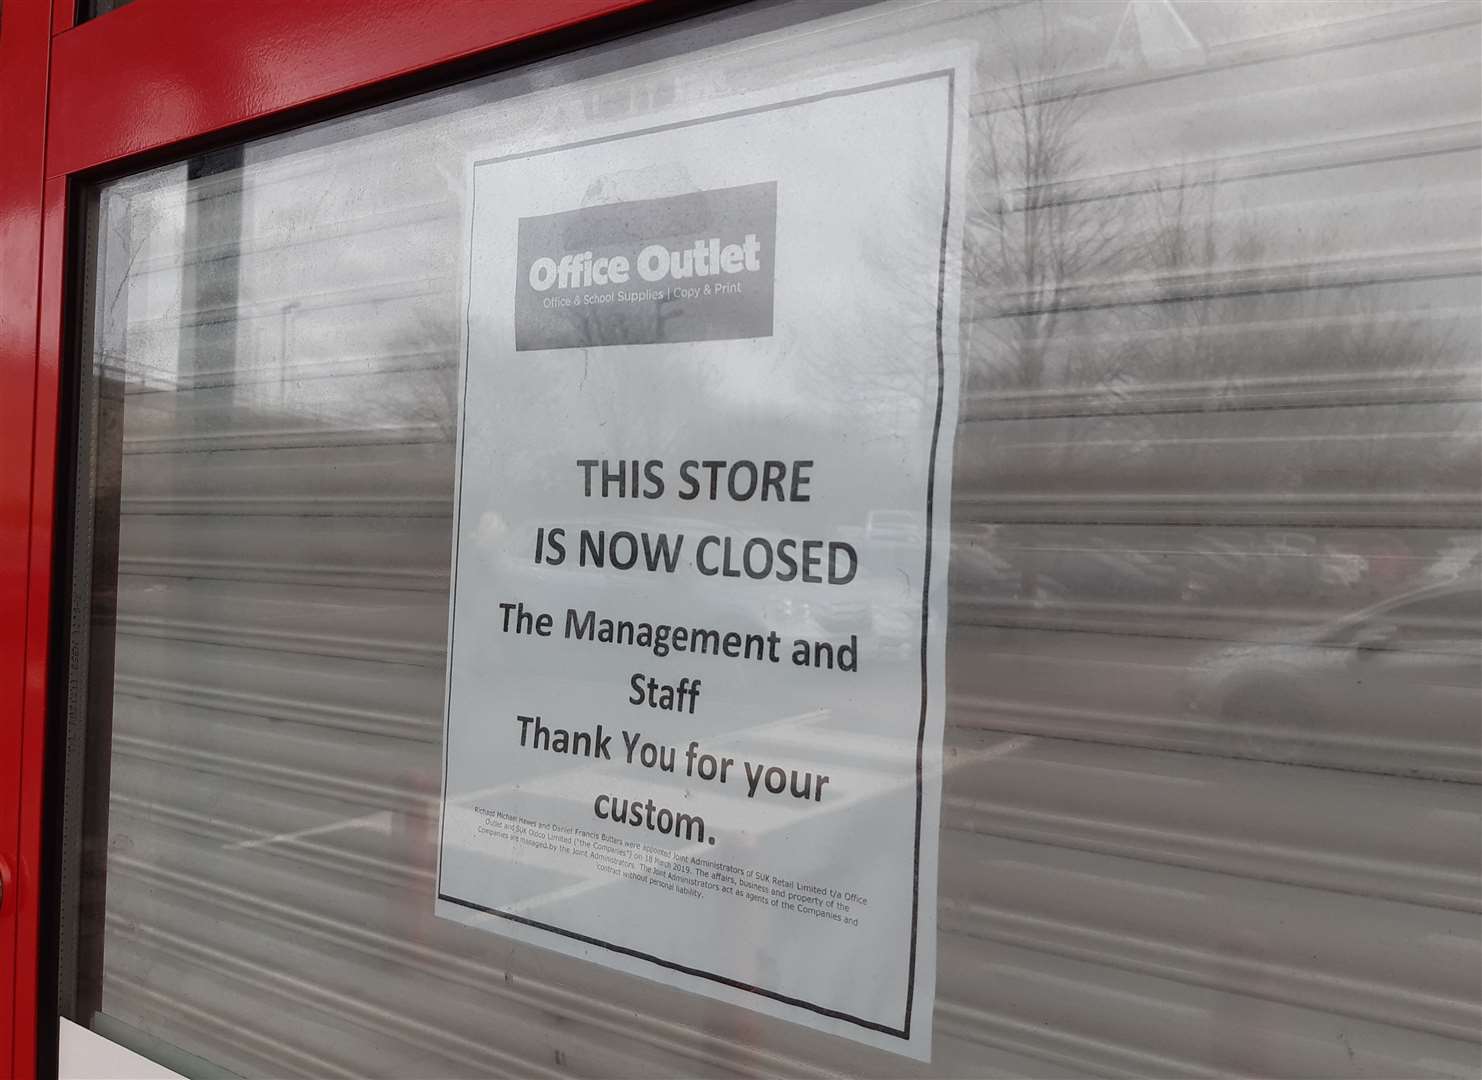 Office Outlet was previously Staples, but closed last year